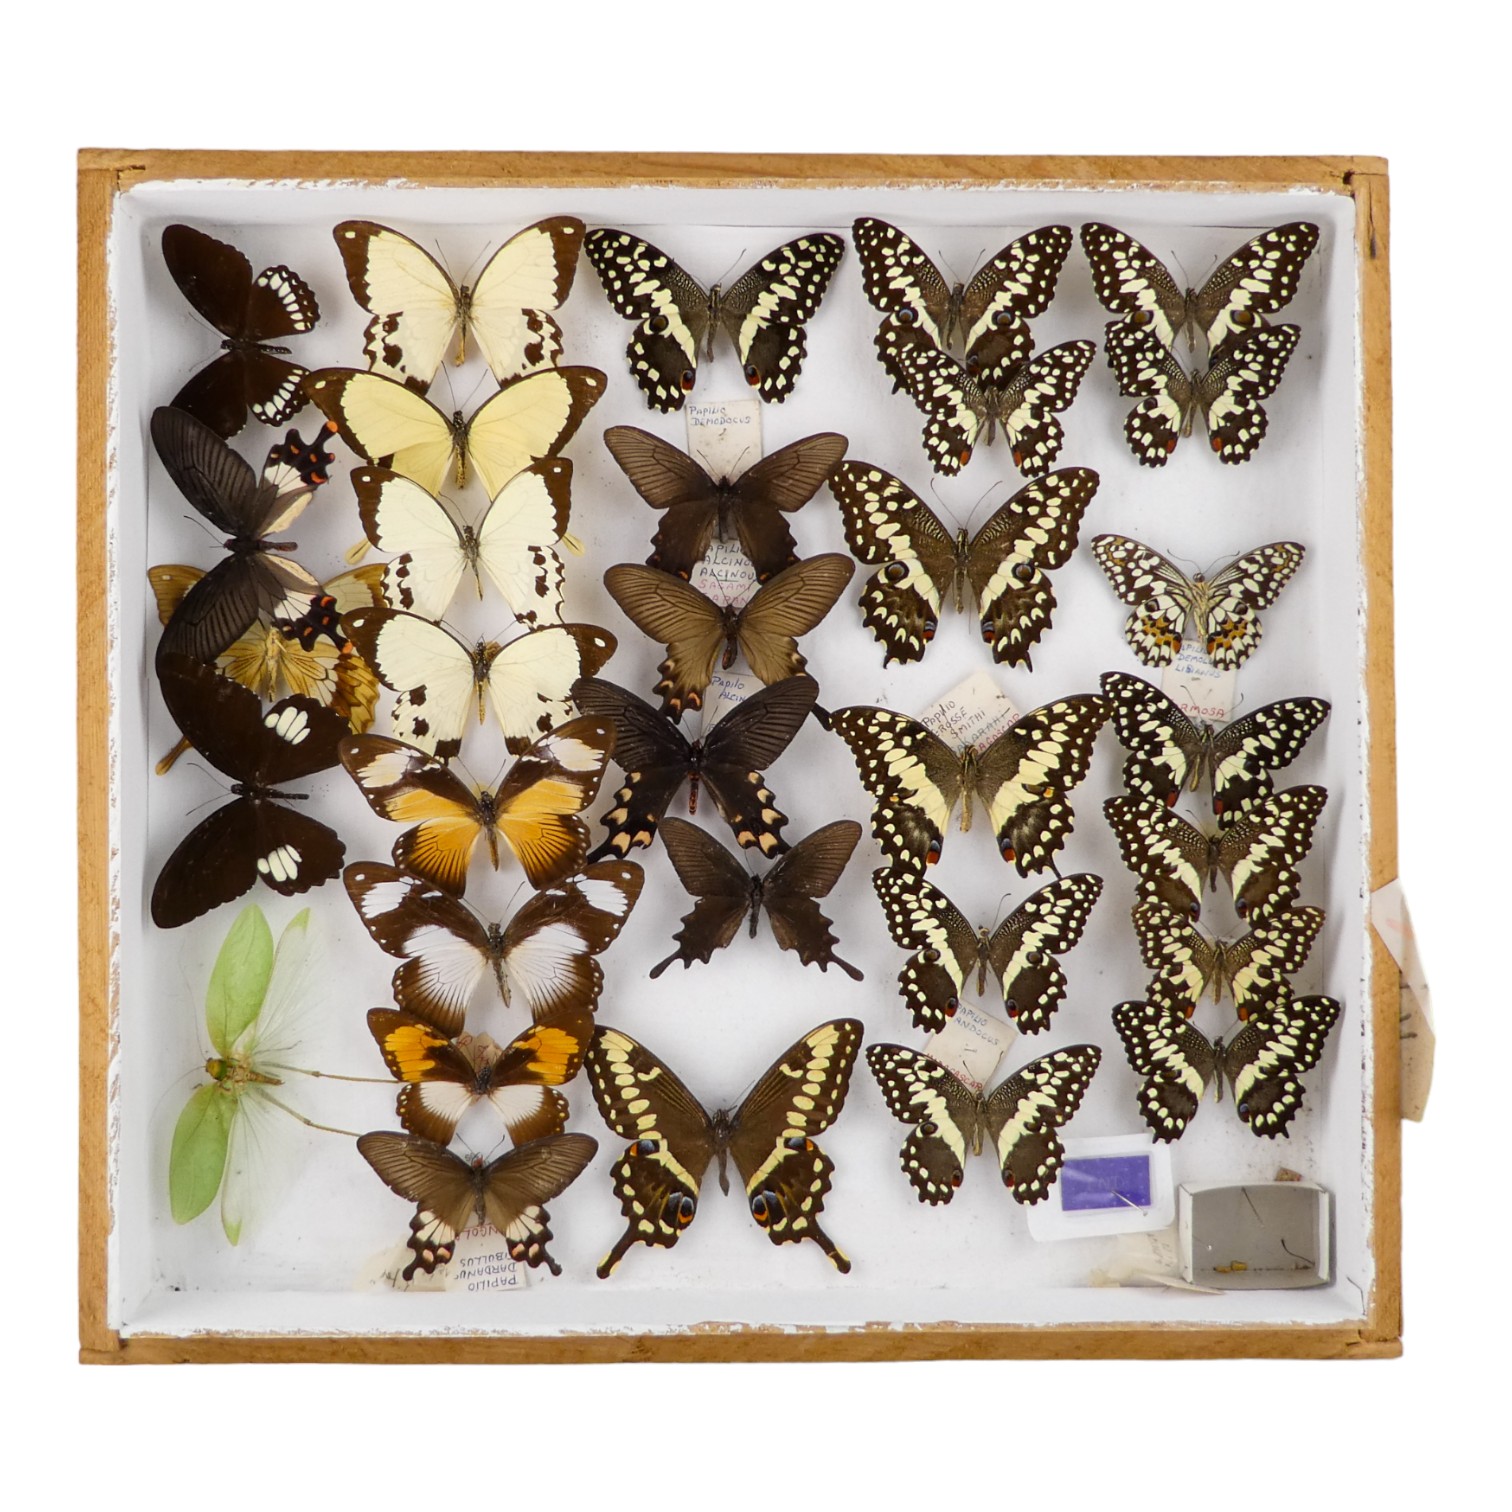 A case of butterflies in five rows - including Emperor Swallowtail, Lime Swallowtail, Common